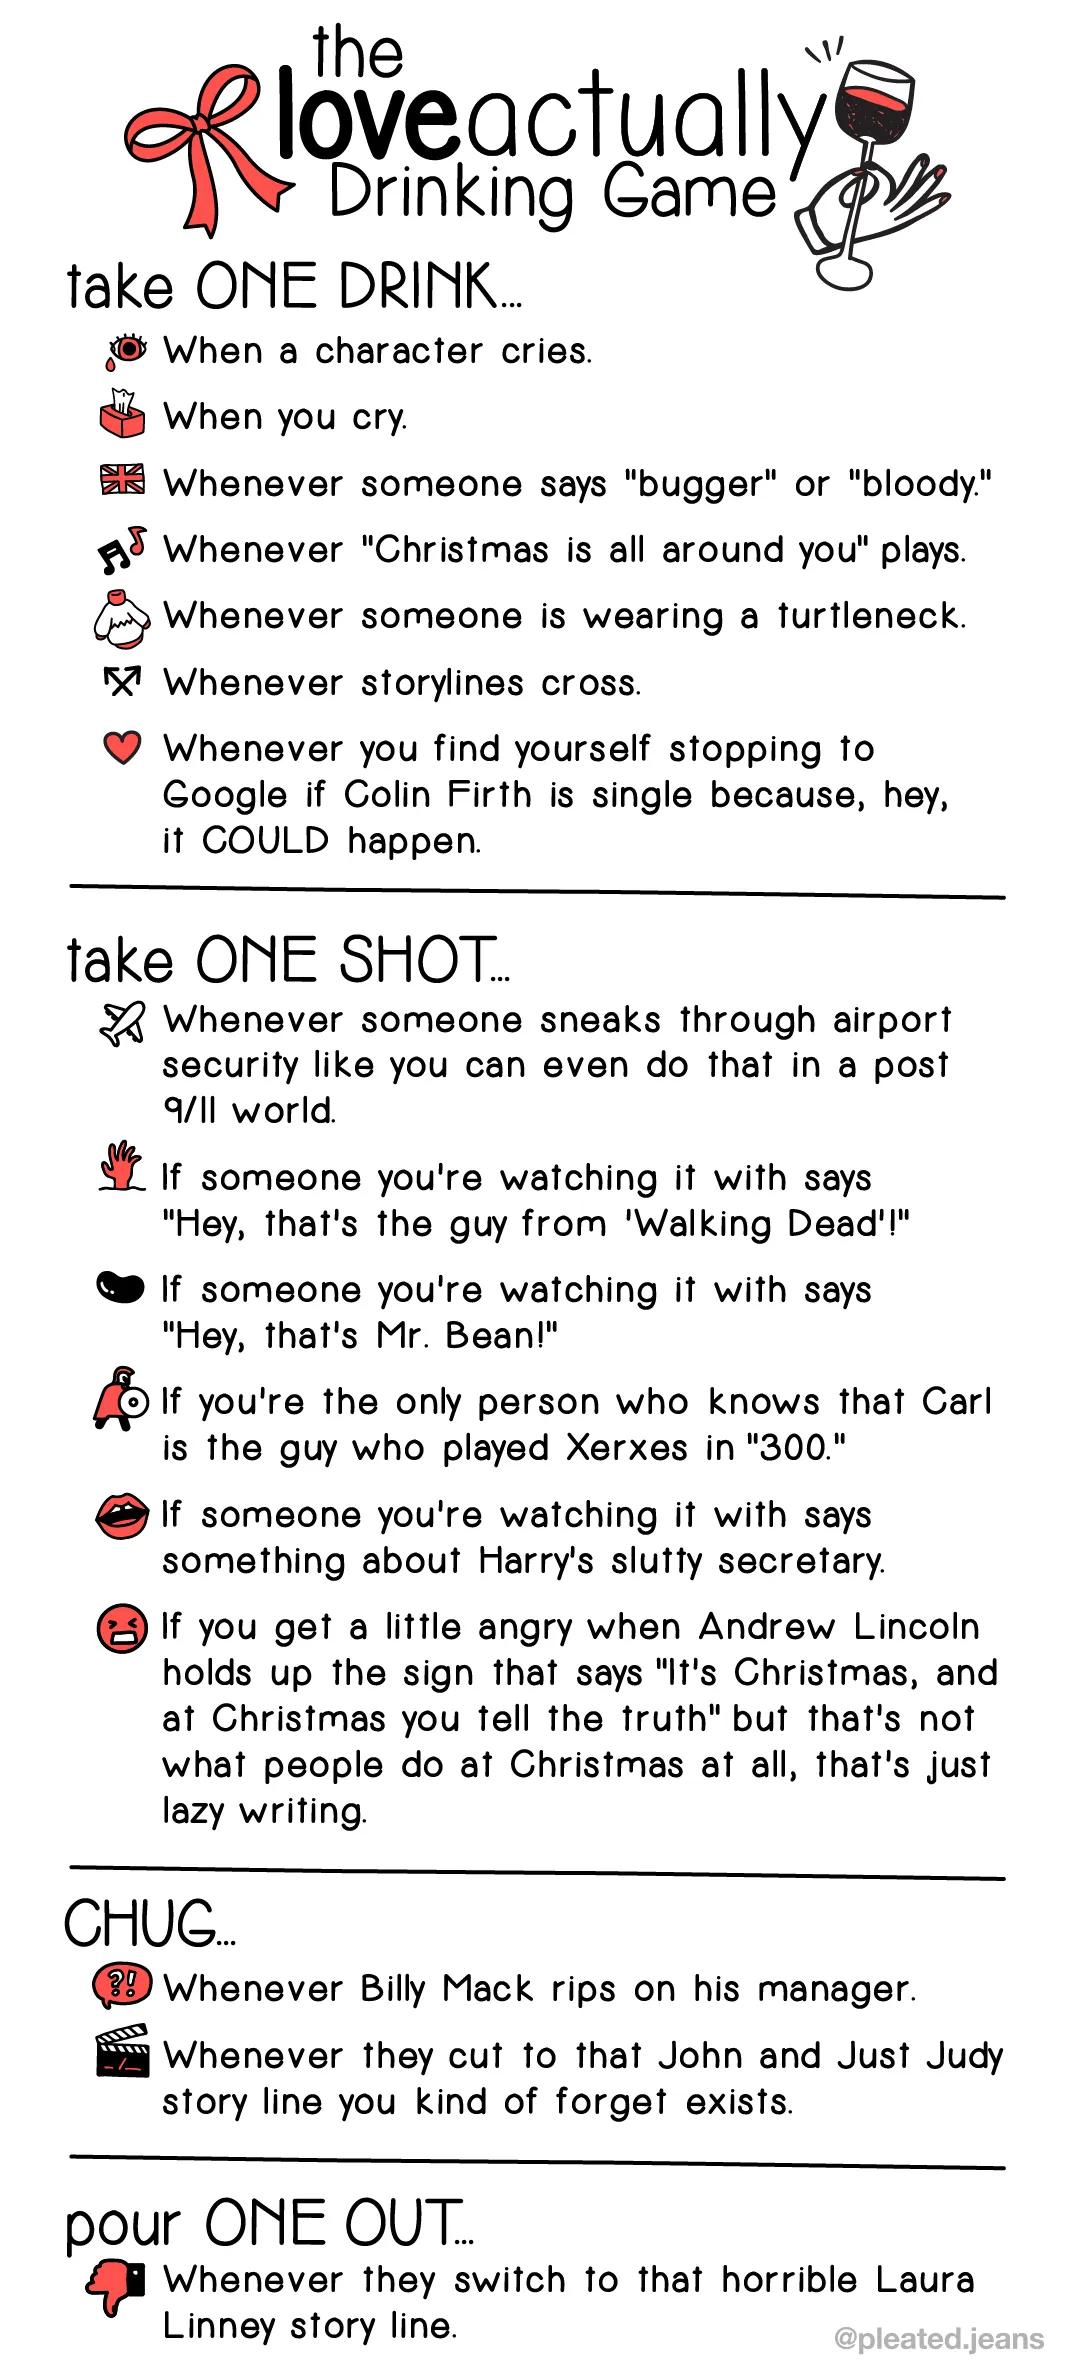 Love Actually (the drinking game)